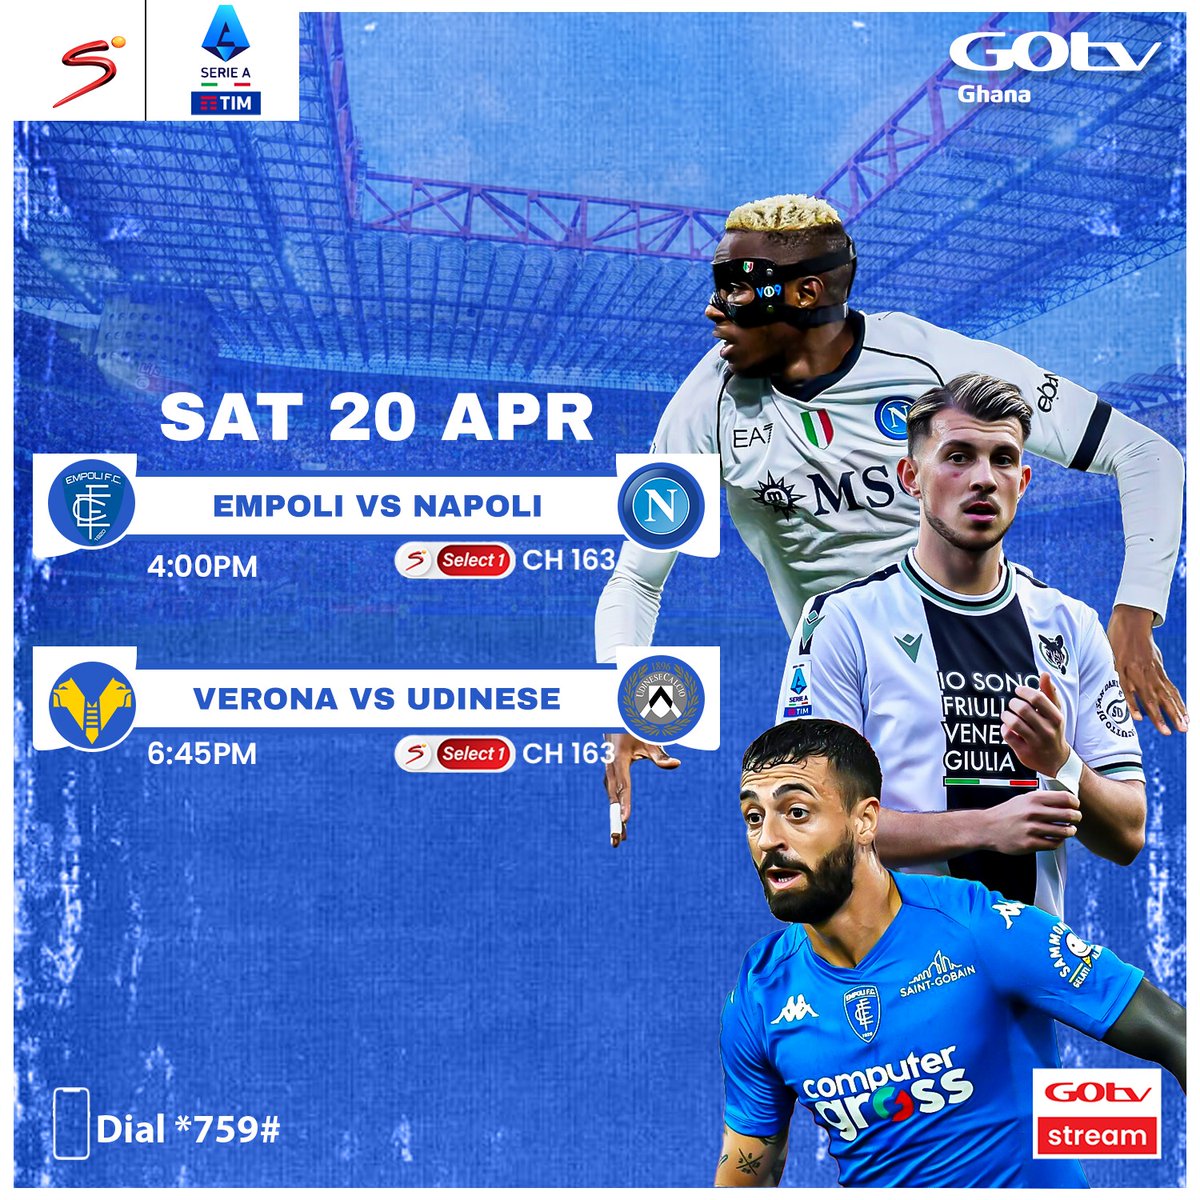 Napoli will look to resurrect their quest for a Champions League spot when they take on relegation-threatened Empoli. Verona Versus Udinese closes the curtain on today's #SerieA matches @ 6.45pm on #GOtvGhana